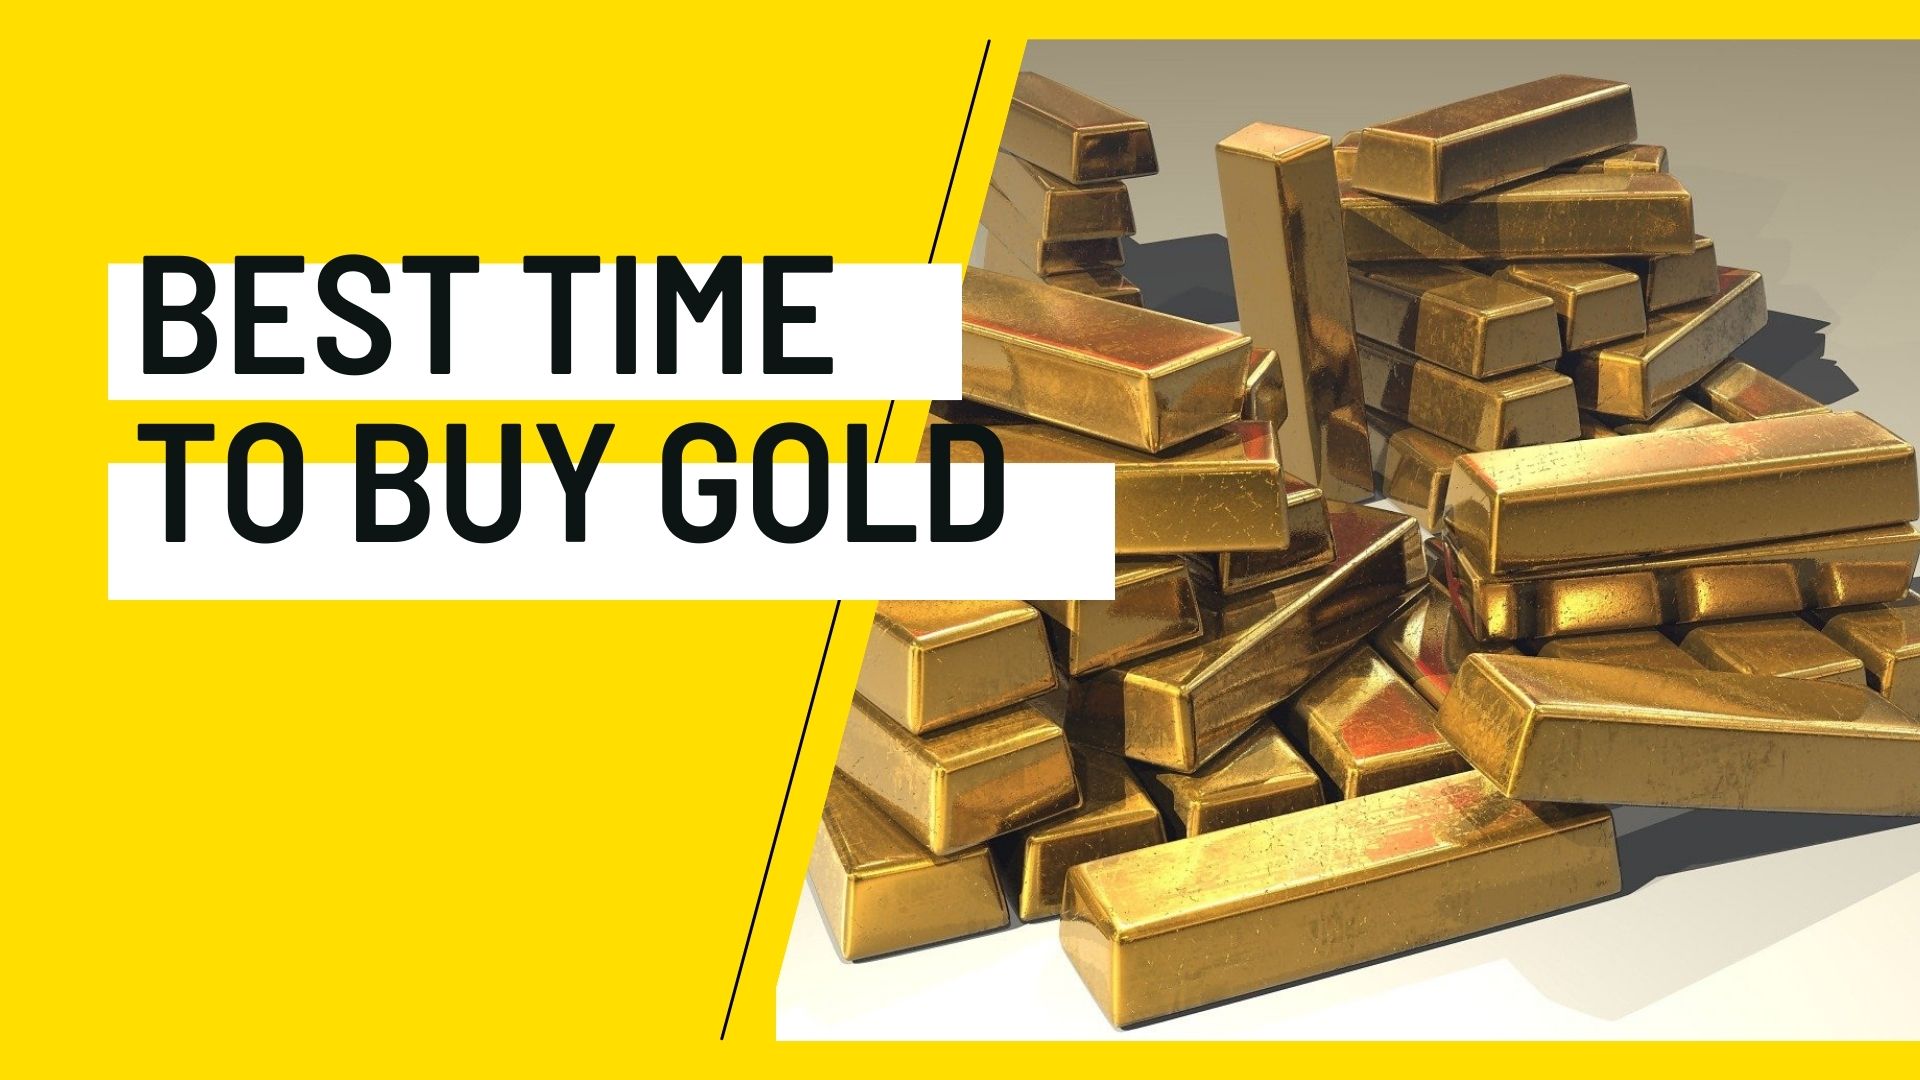 What is the Best Time to Buy Gold? 'Monomousumi'